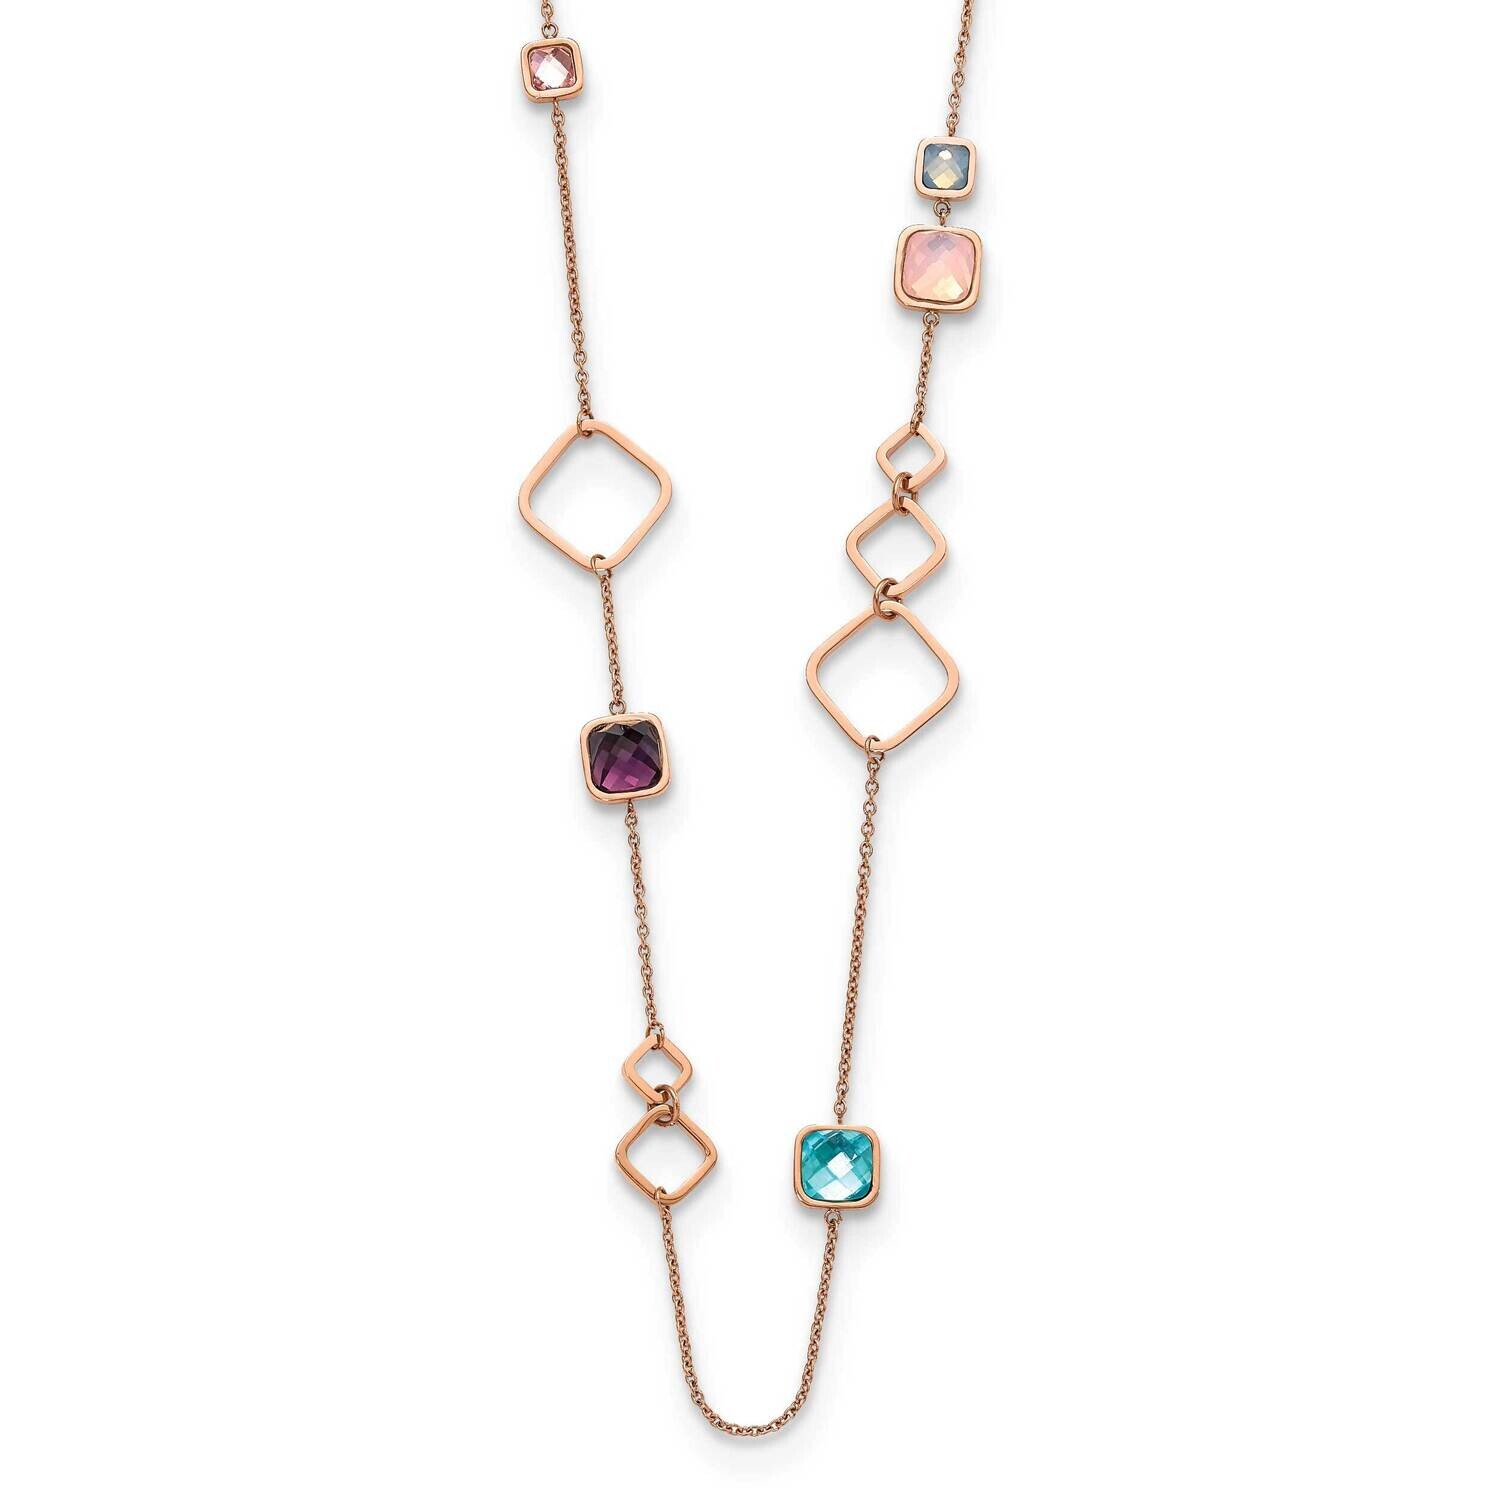 Chisel Polished Rose Ip-Plated Multicolor Crystal On A 21.5 Inch Cable Chain 2.75 Inch Extension Necklace Stainless Steel SRN3077-21.5